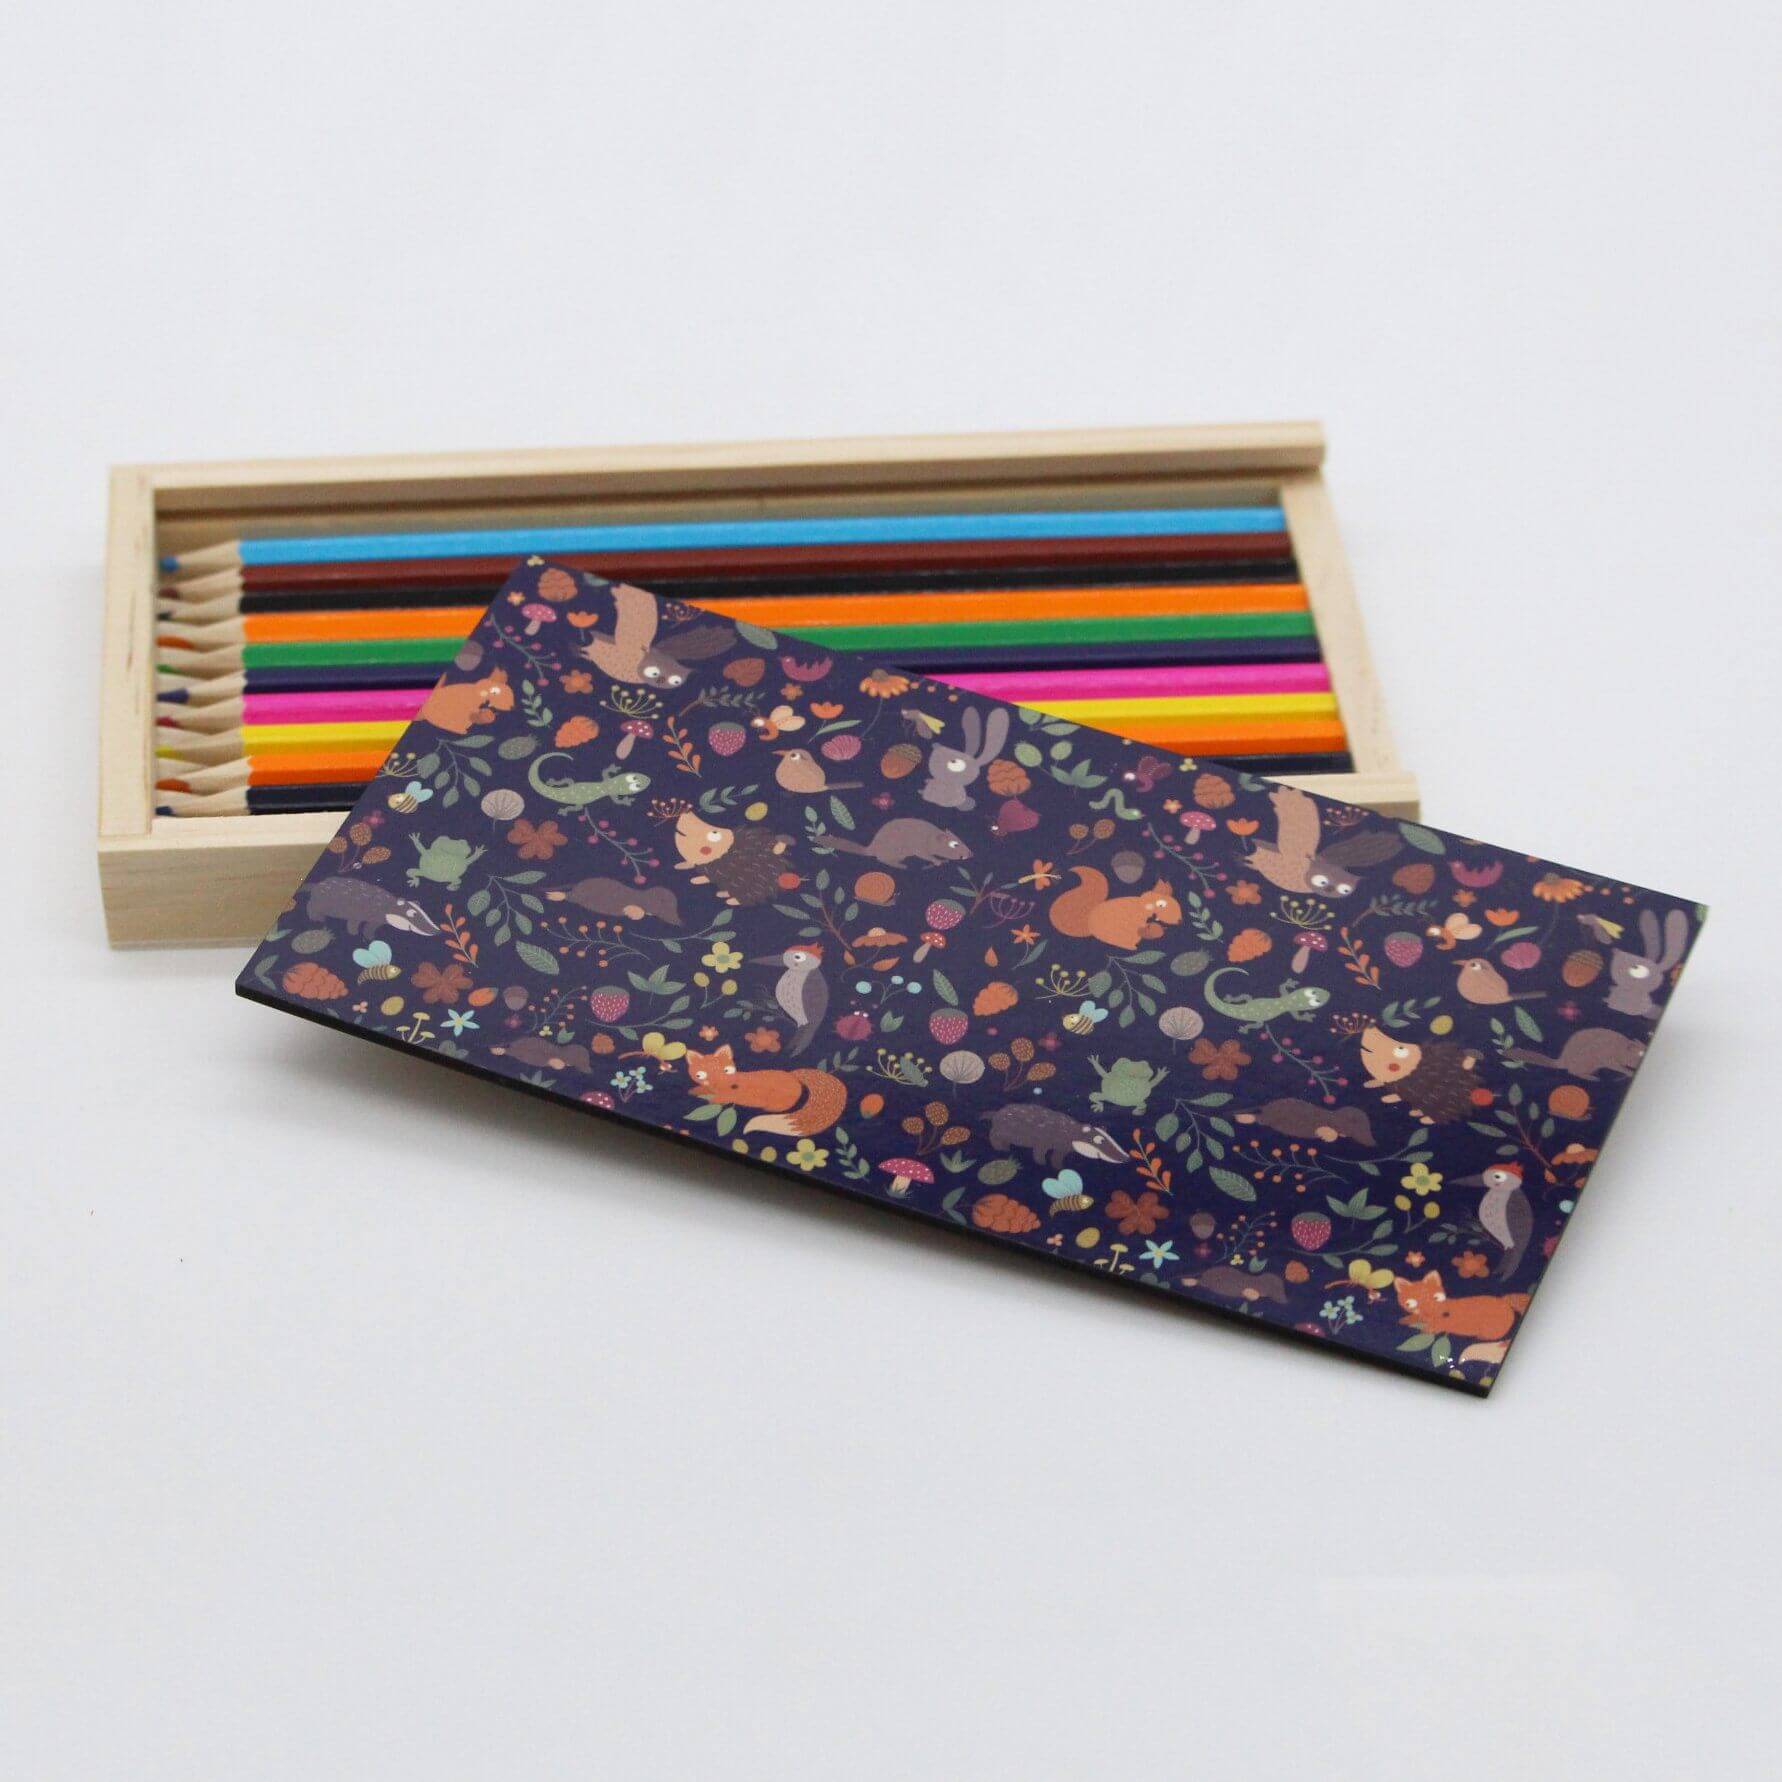 Woodland Wooden Pencil Box with Coloured Pencils  Mustard and Gray Ltd Shropshire UK